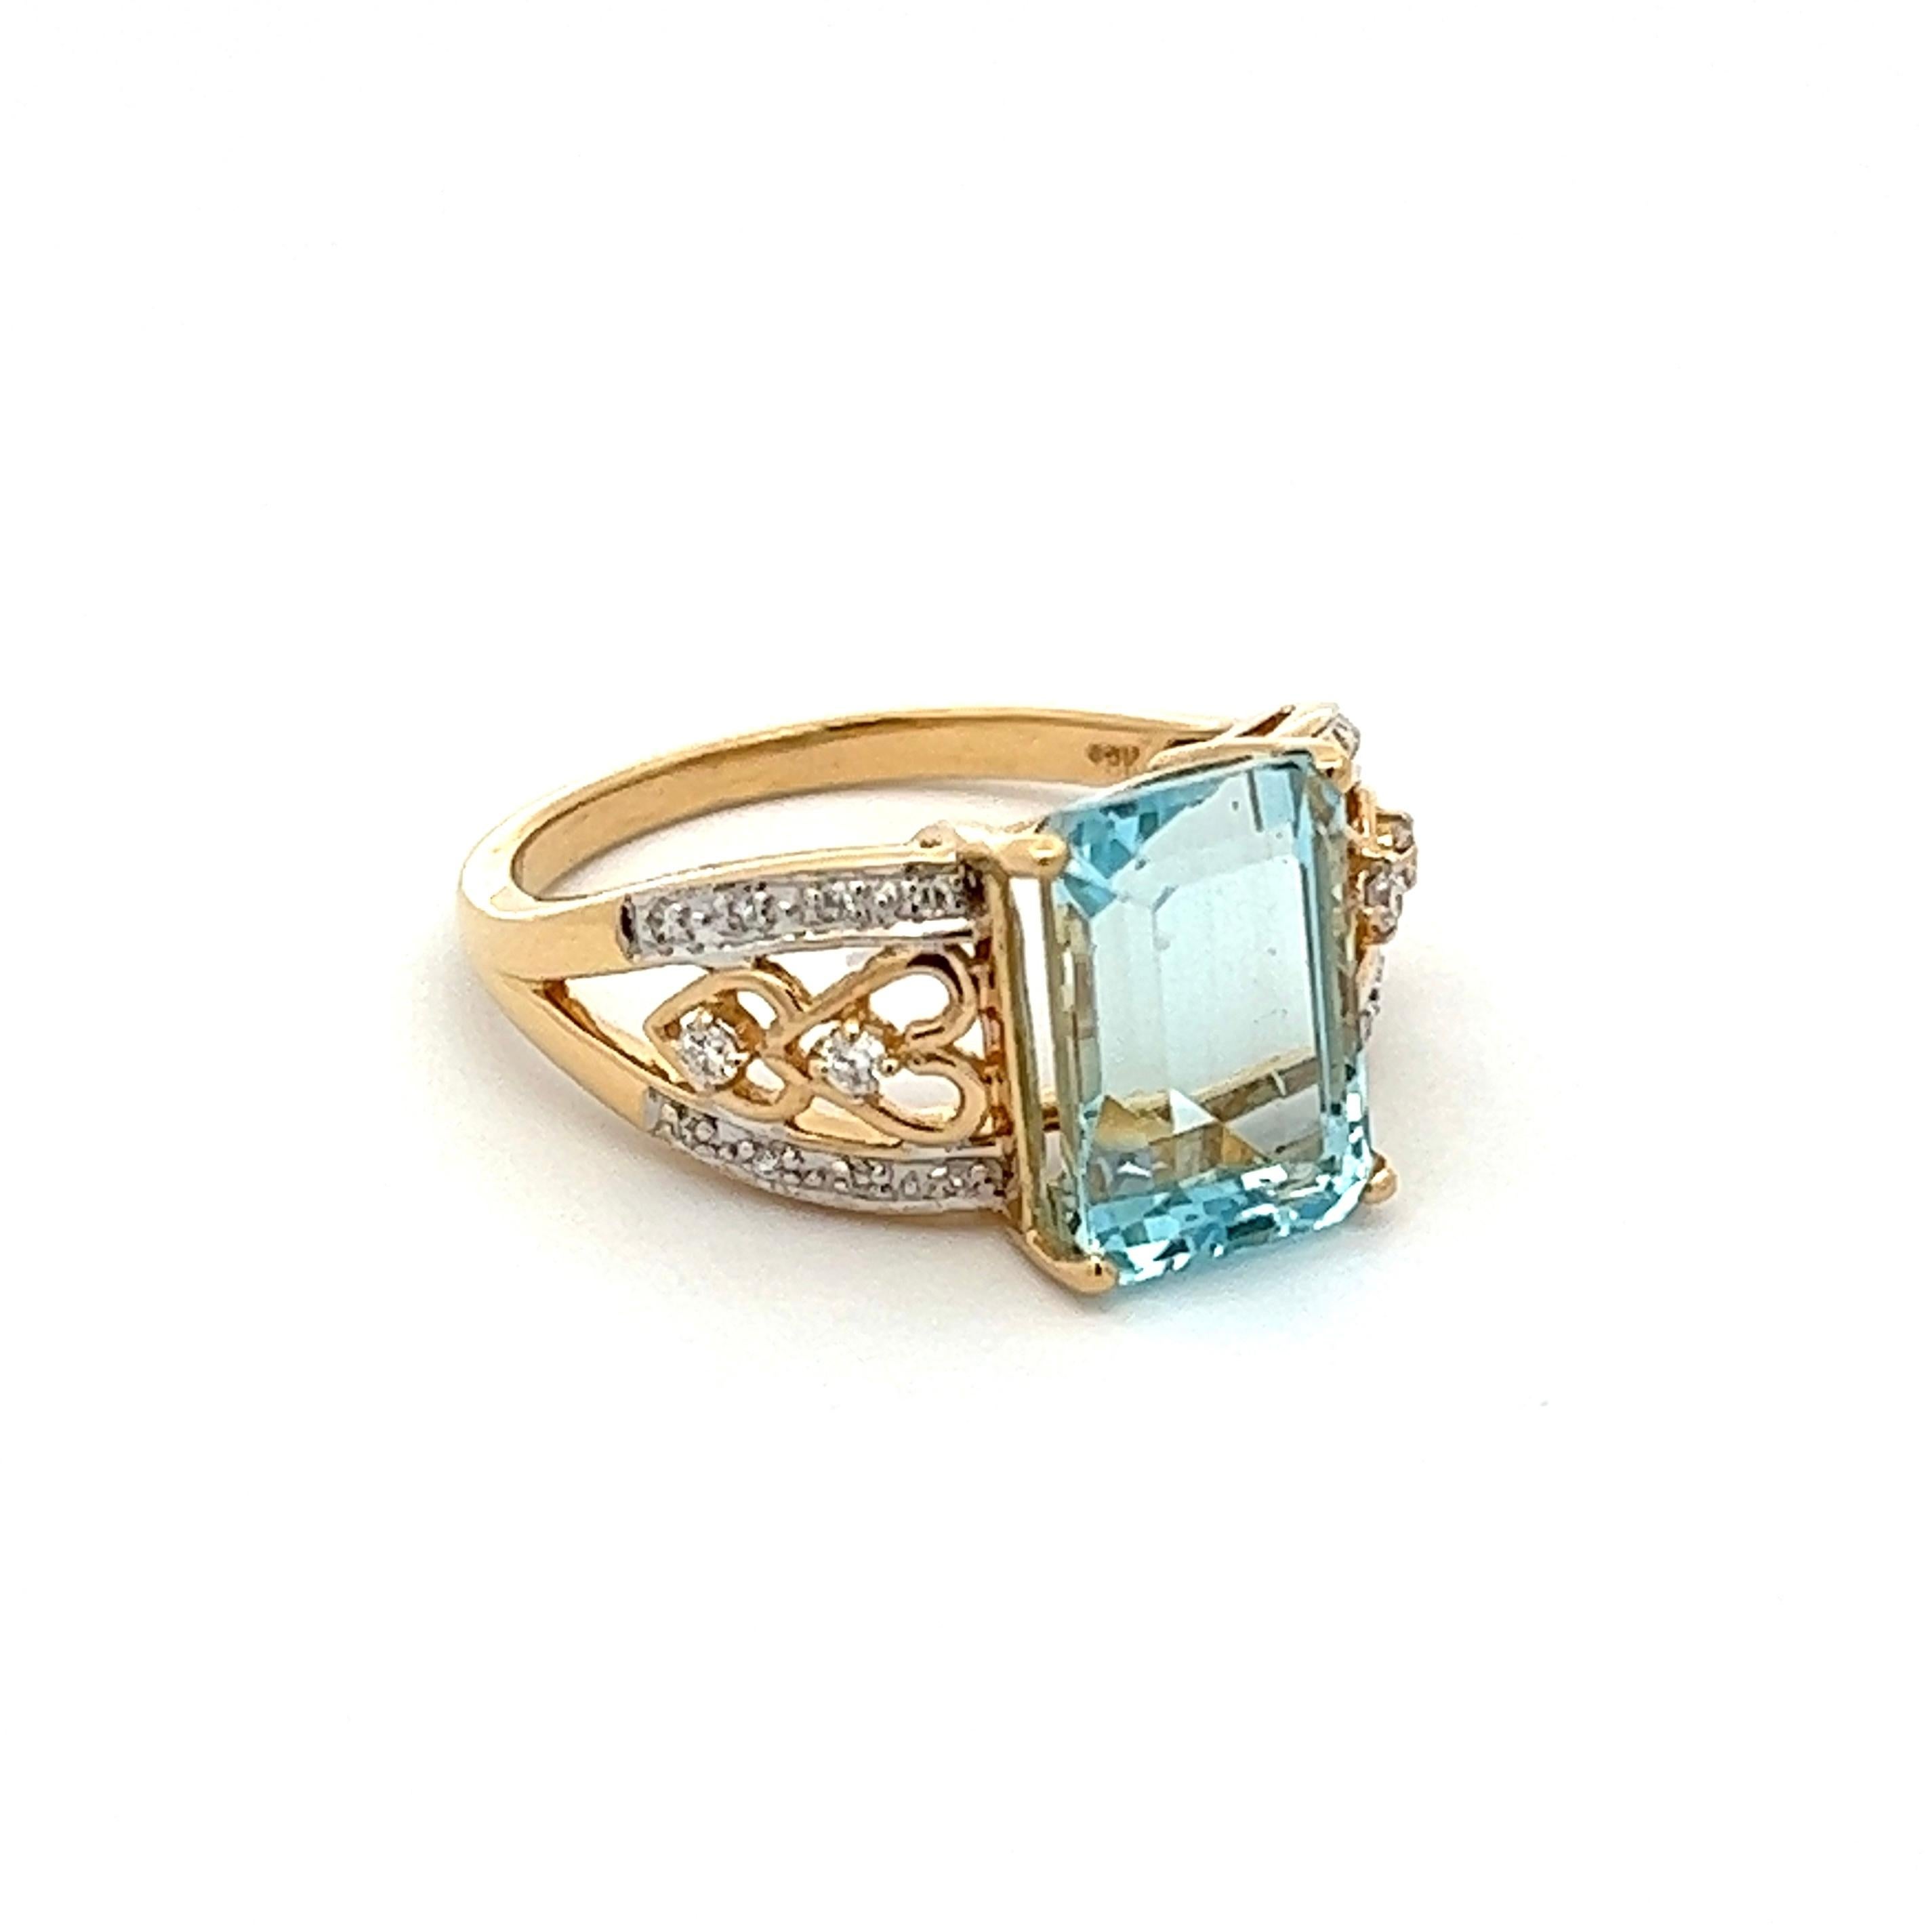 Simply Beautiful! Finely detailed Aquamarine and Diamond Art Deco Revival Cocktail Ring. Centering a Hand set securely nestled 3.55 Carat Emerald-cut Aquamarine, accented on either side by Round Brilliant-Cut Diamonds, weighing approx. 0.18tcw